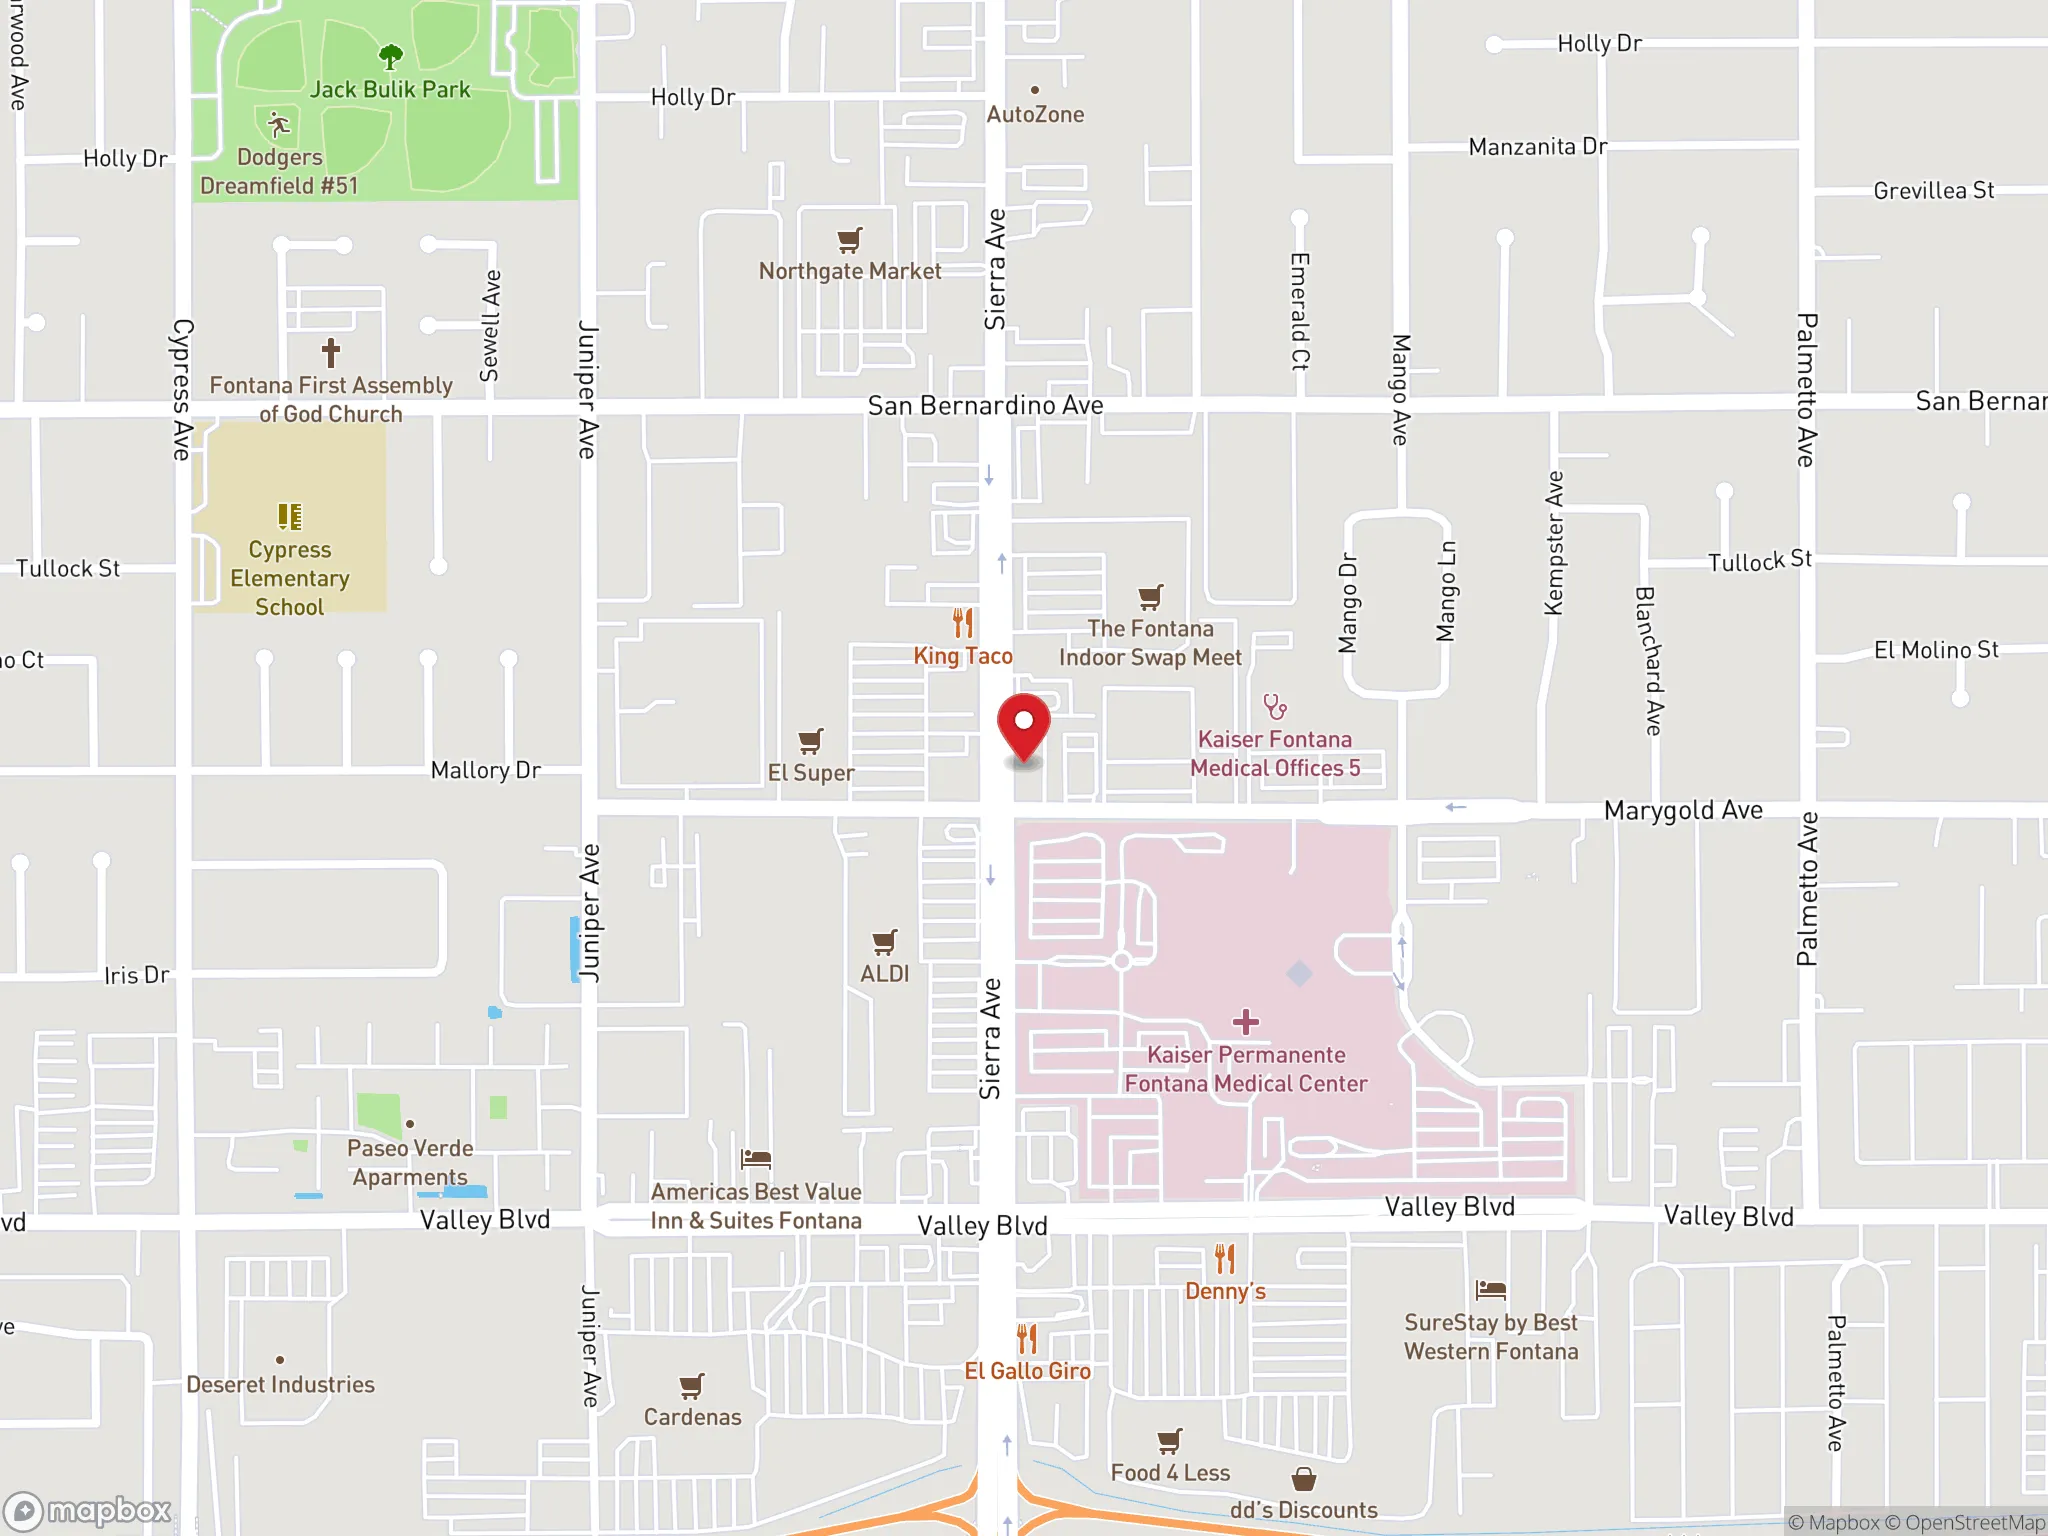 Map showing location of Dave's Hot Chicken restaurant in Fontana, California.